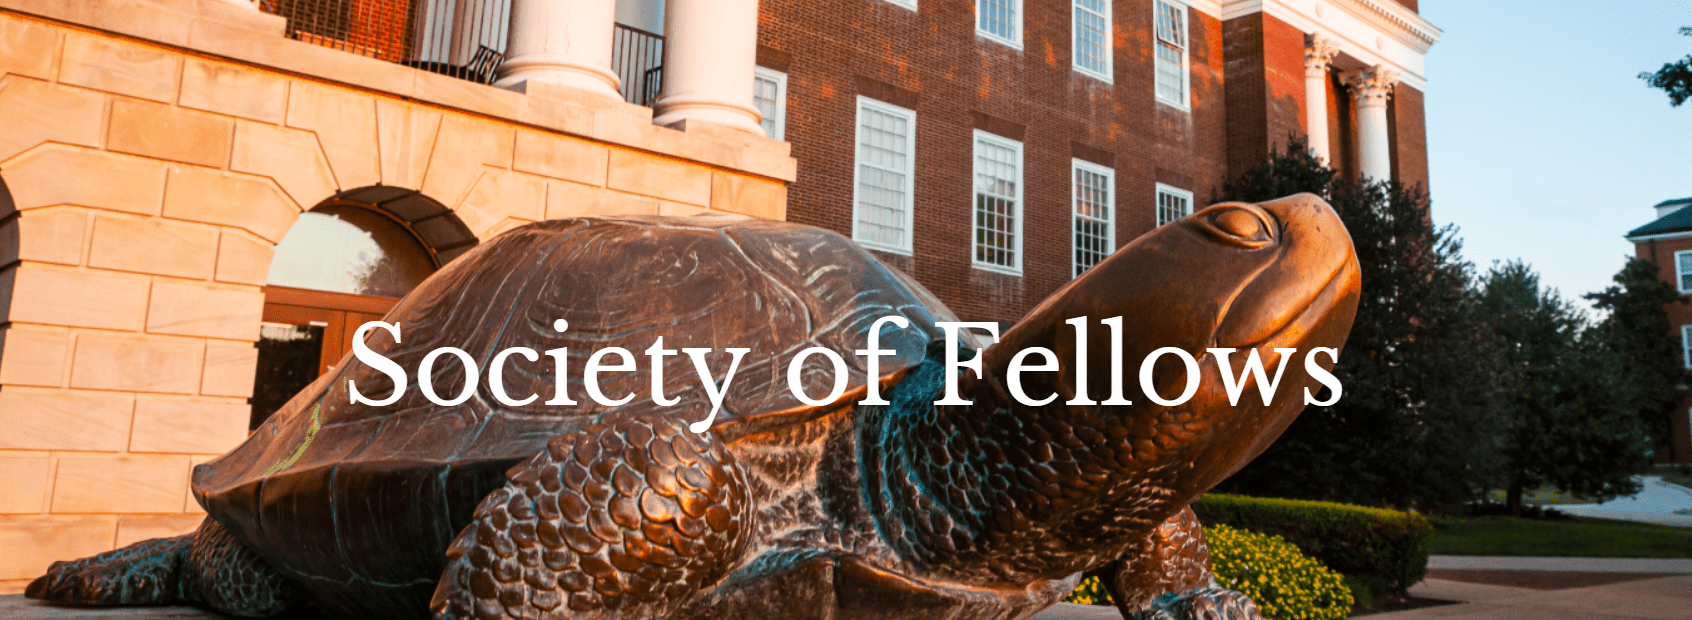 Society of Fellows with Testudo statue